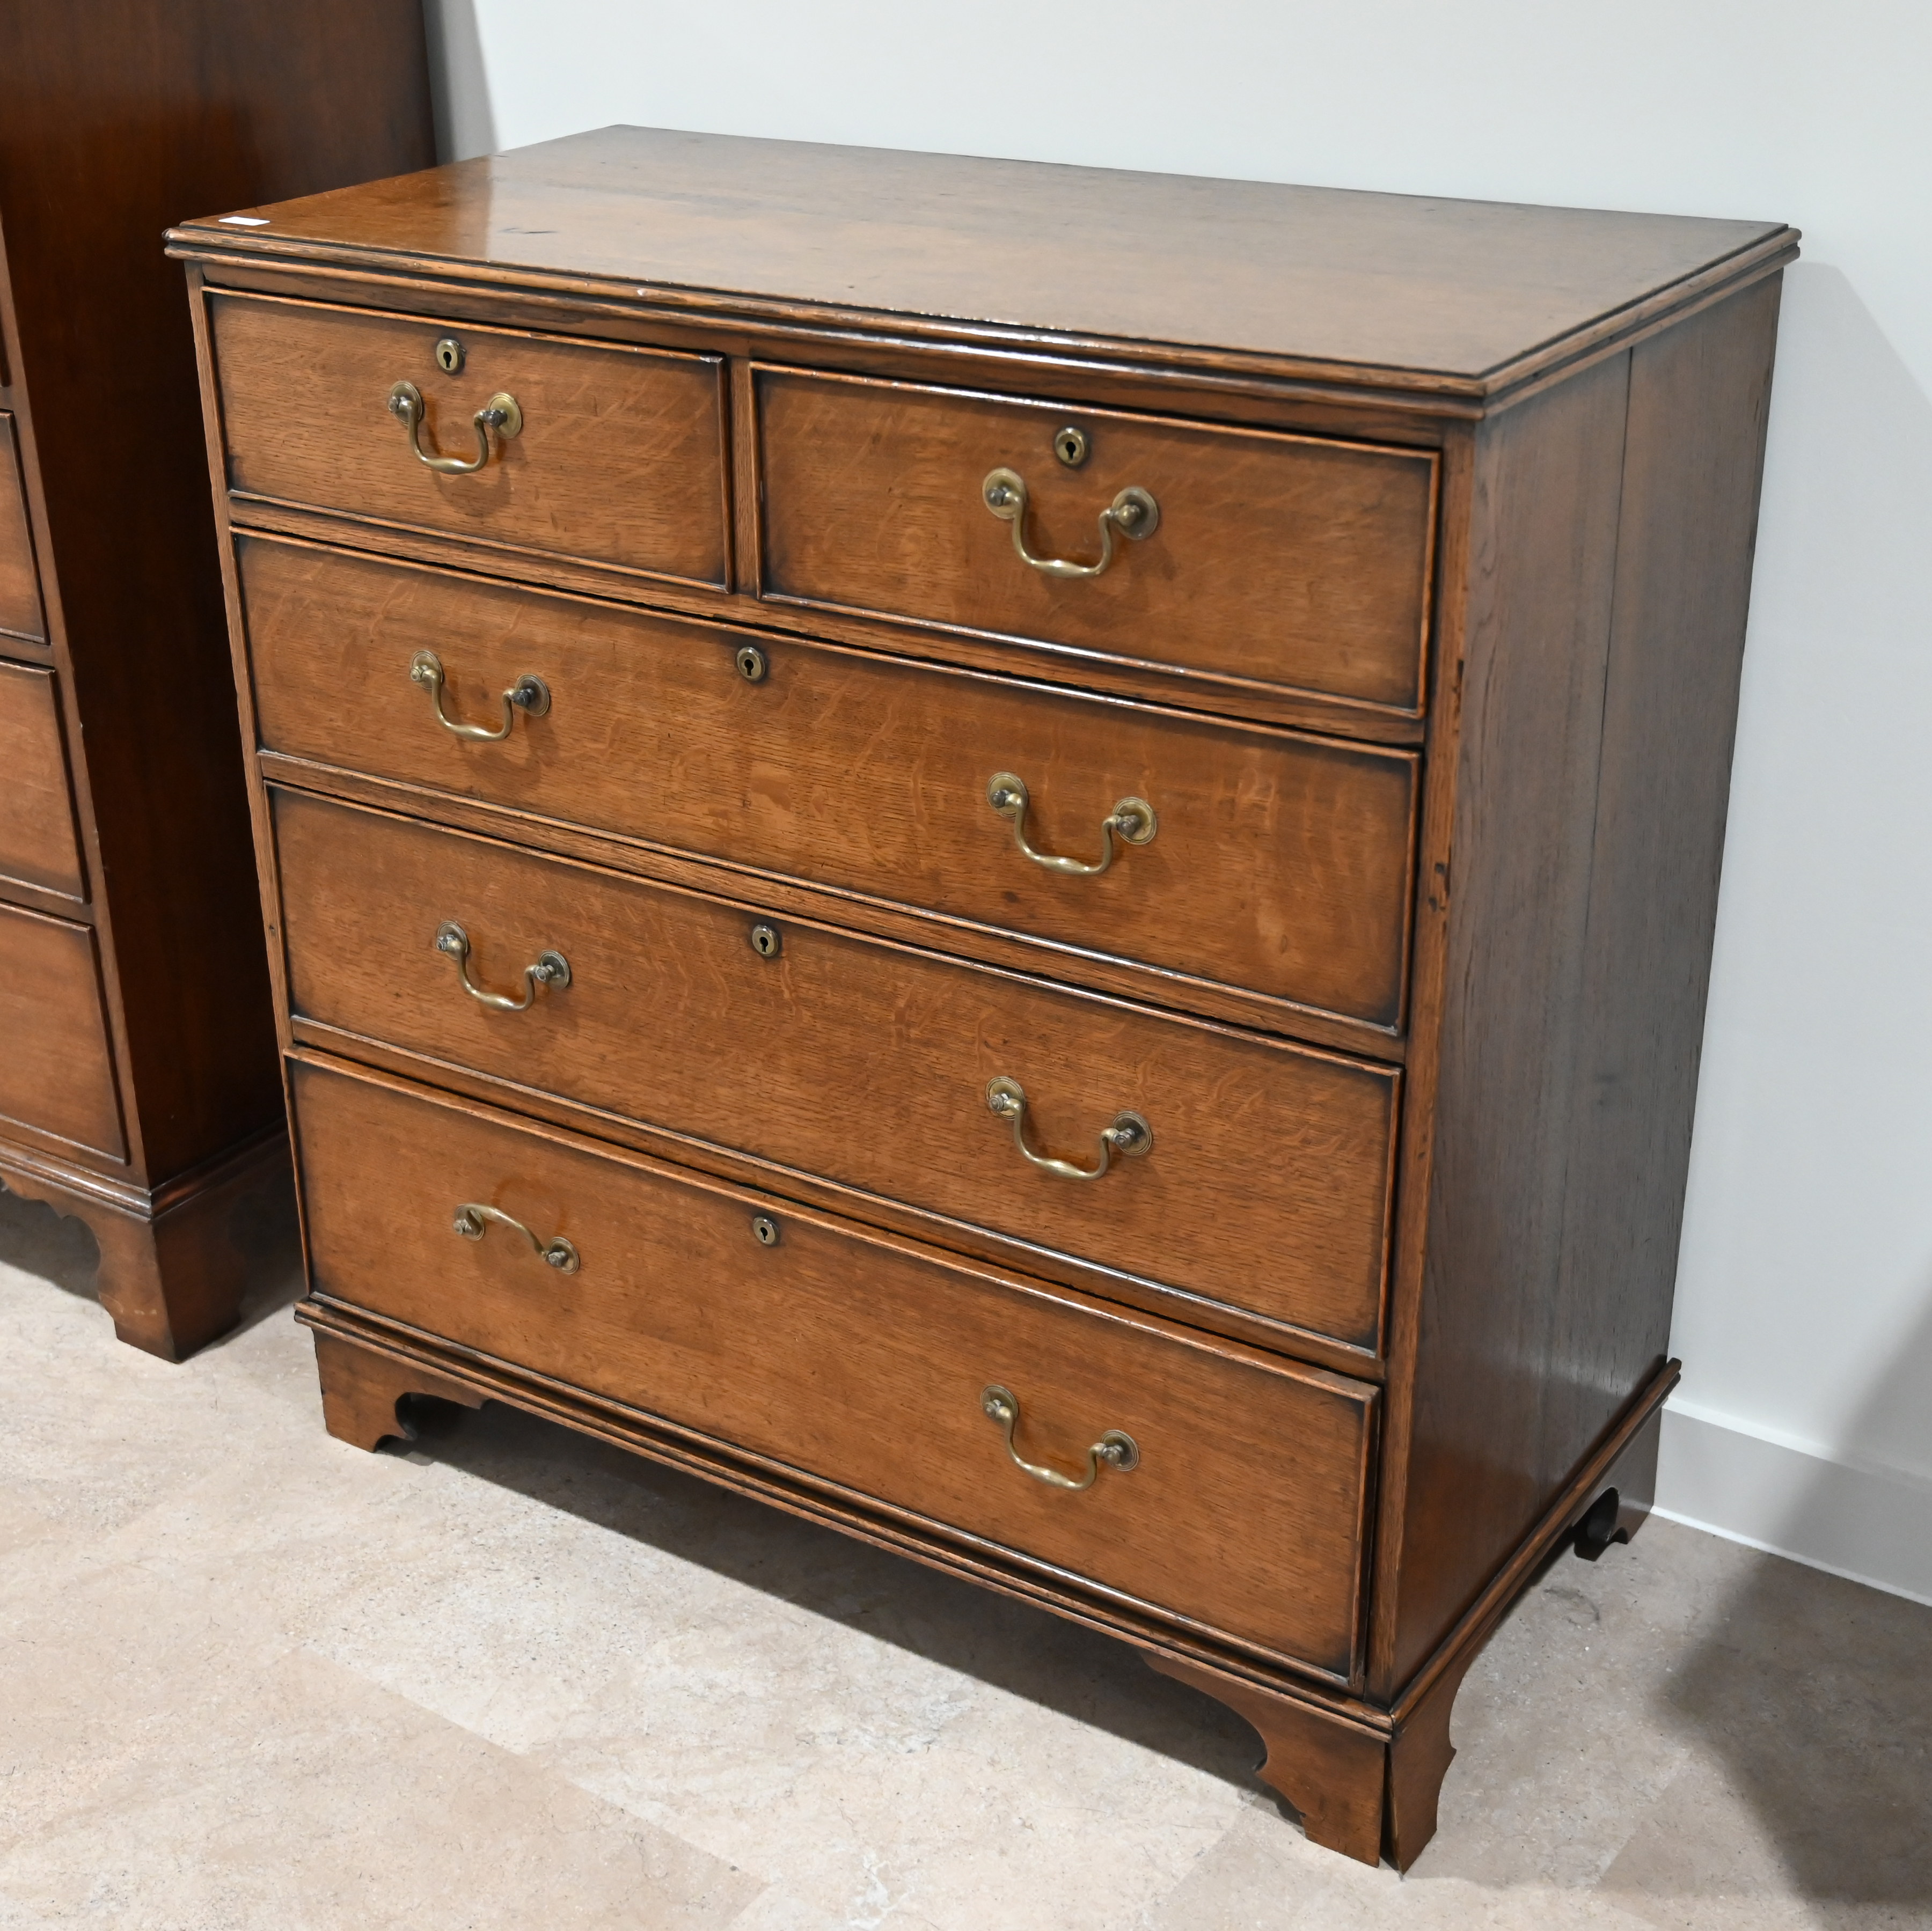 A late Georgian Oak chest of 2 over 3 drawers with brass handles. W 100cm, D 51cm, H 102cm. (C) - Image 2 of 3